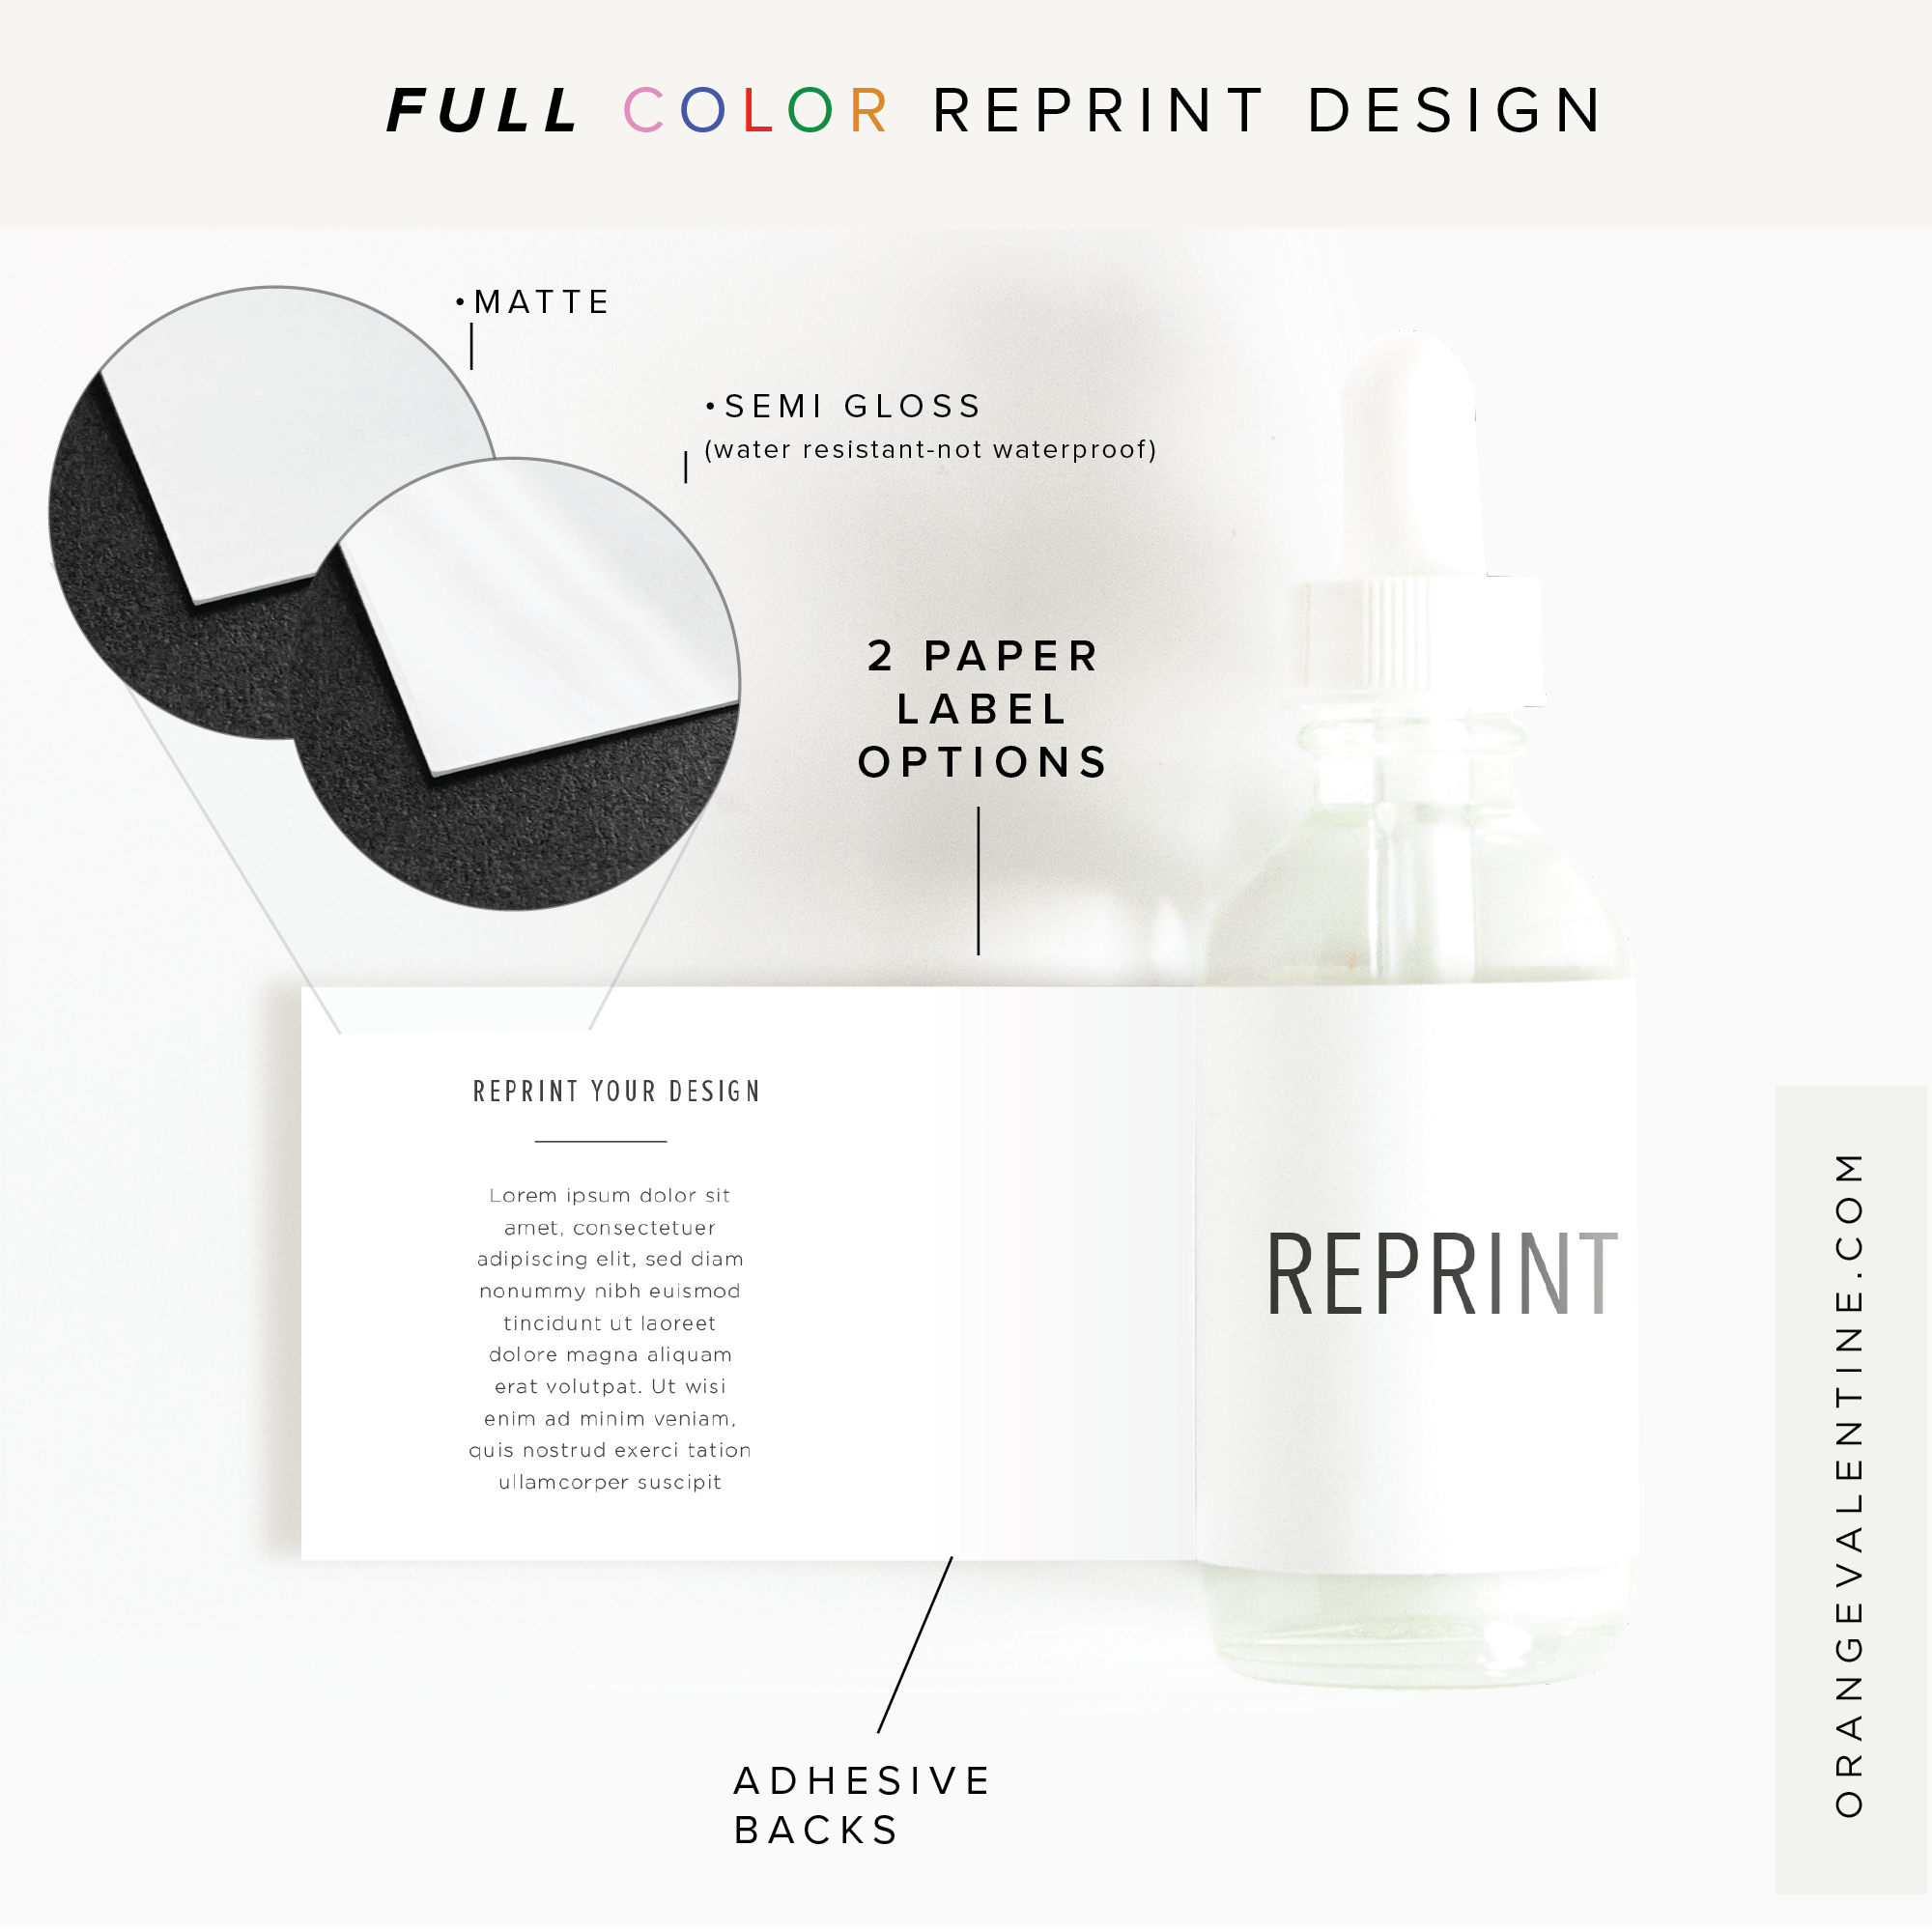 Reprint Your Wrap Product Label